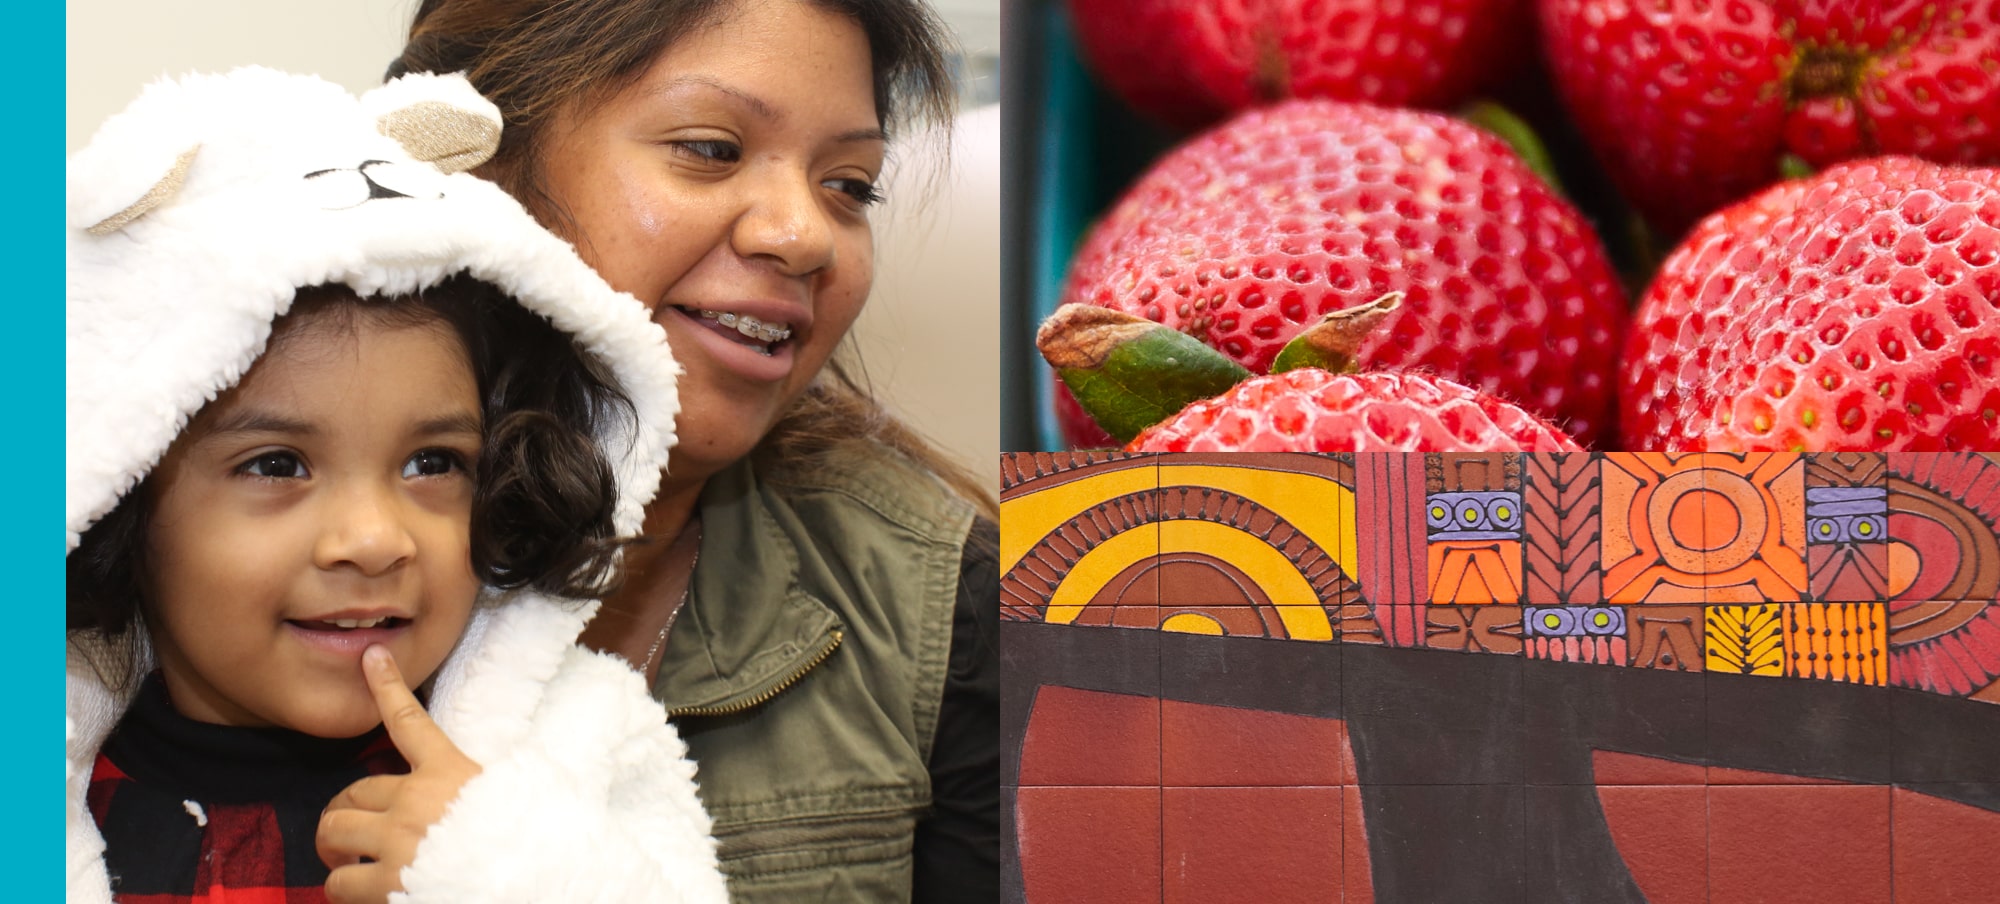 Collage of smiling Latina mother holding her daughter in a fuzzy white hoodie on left, close up of strawberries and mural on right